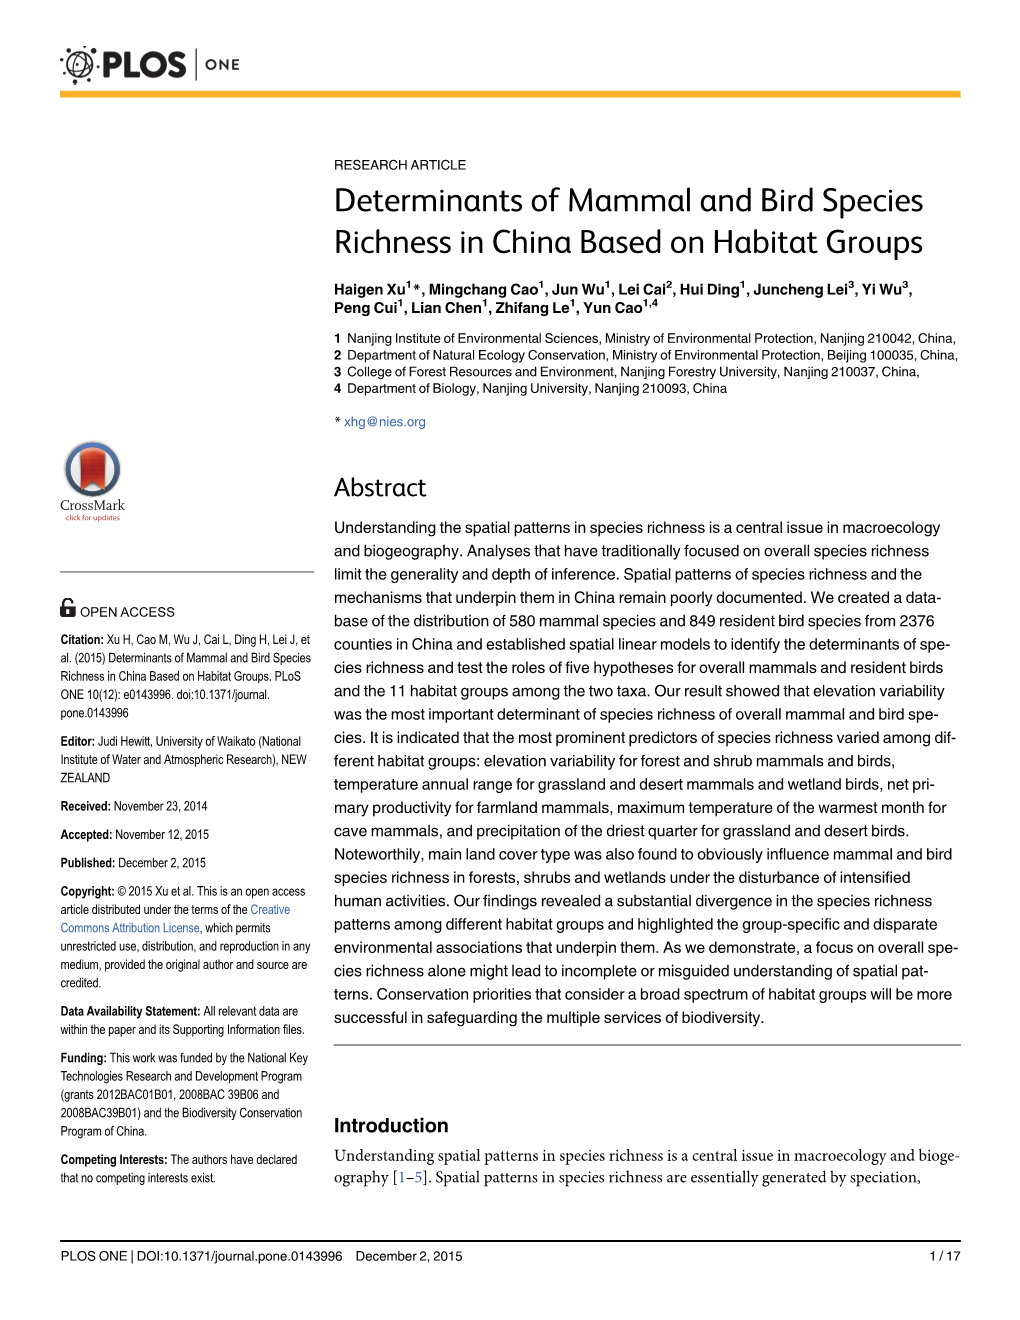 Determinants of Mammal and Bird Species Richness in China Based on Habitat Groups